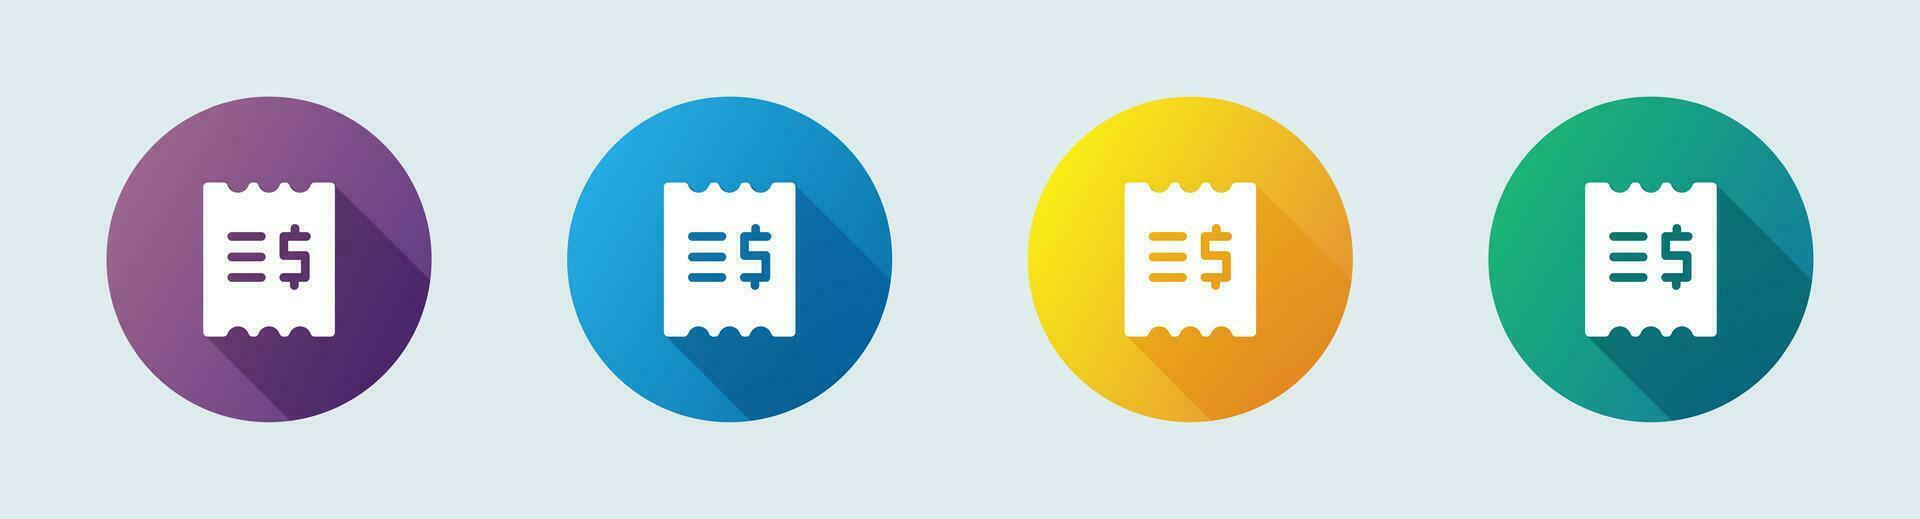 Invoice solid icon in flat design style. Bill signs vector illustration.